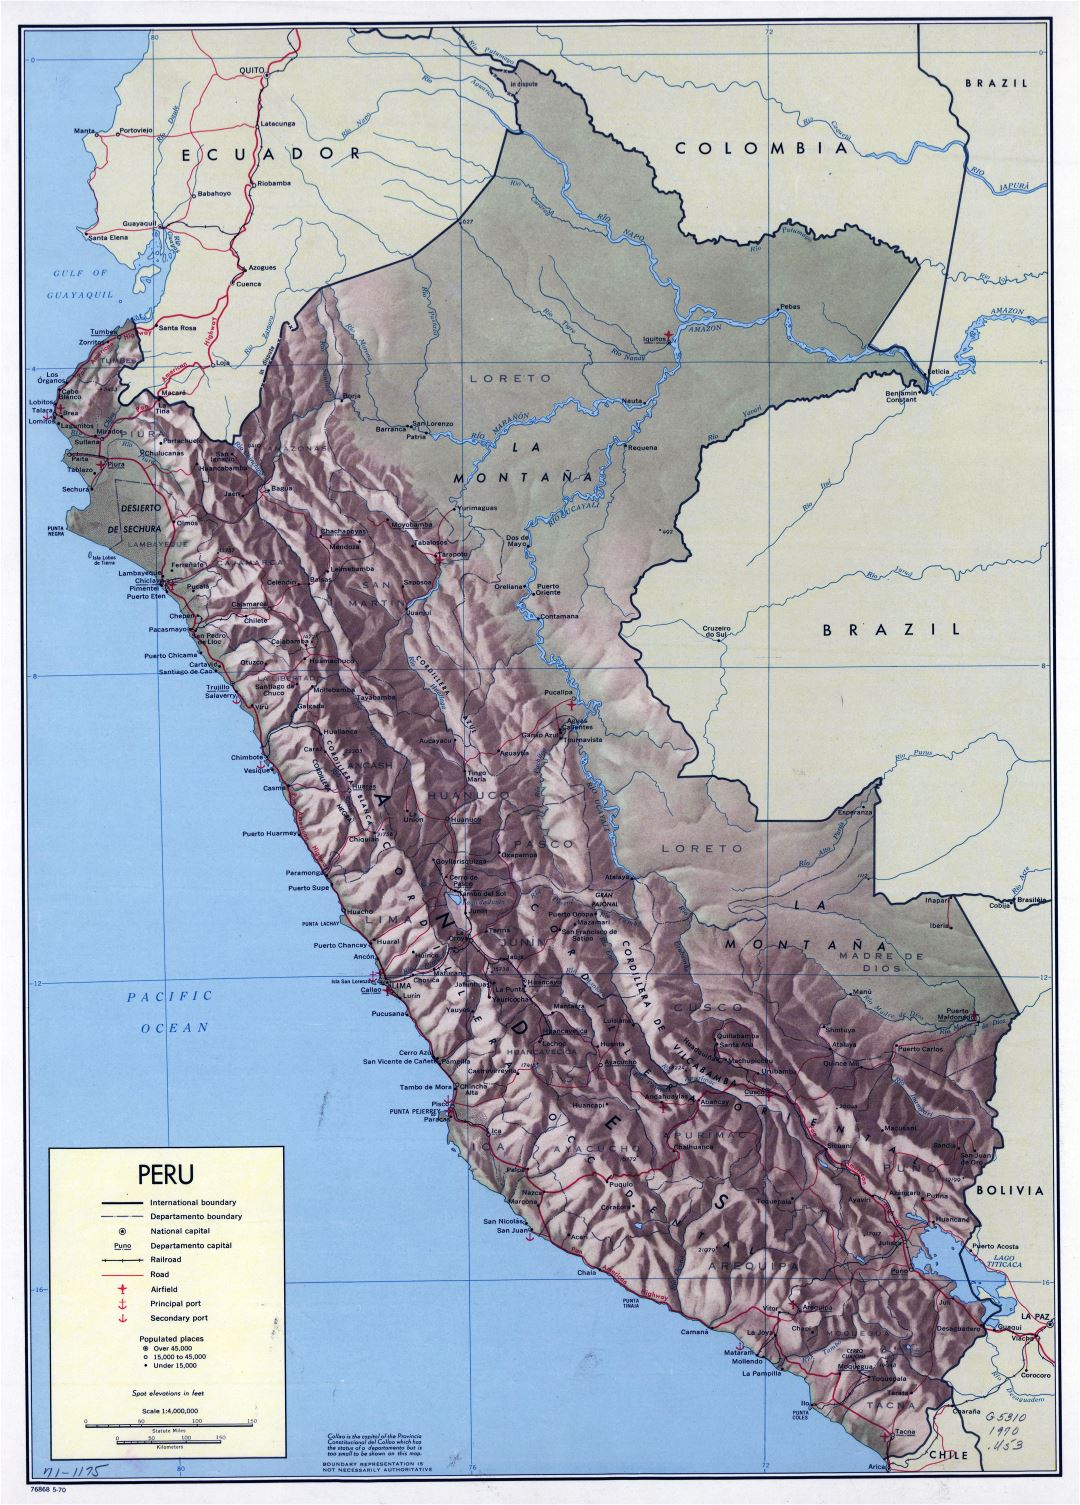 Large scale political and administrative map of Peru with relief, marks of roads, railroads, cities, airports and sea ports - 1970